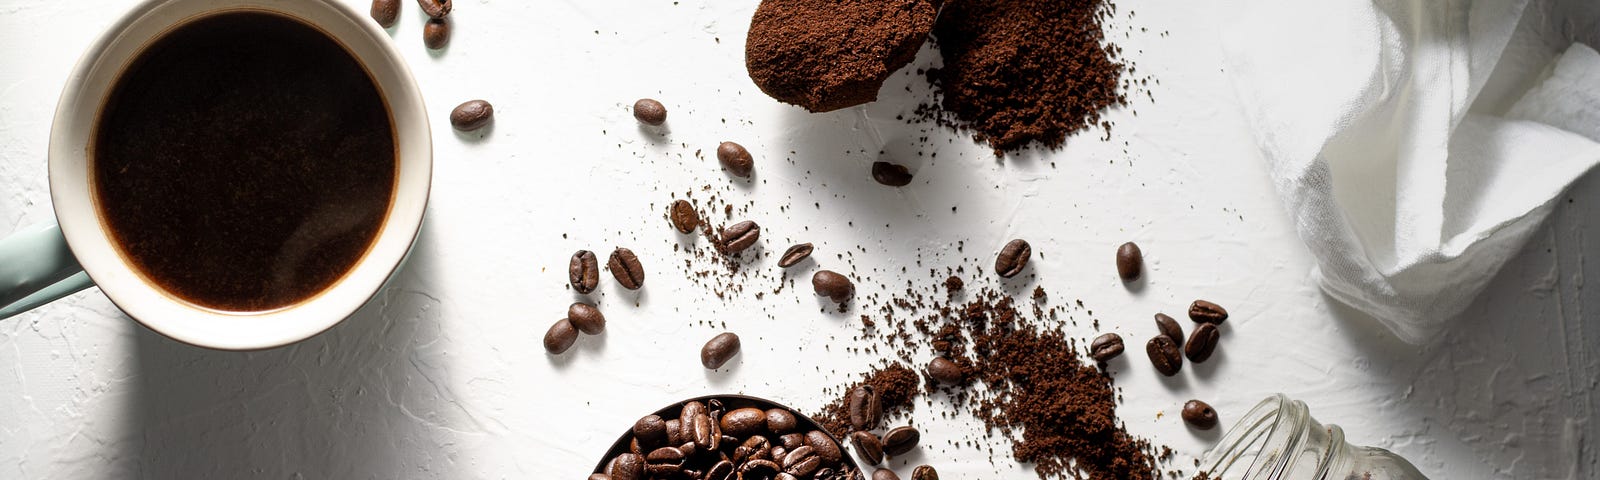 mug of coffee surrounded by whole coffee beans and ground coffee spilled on a white table cloth